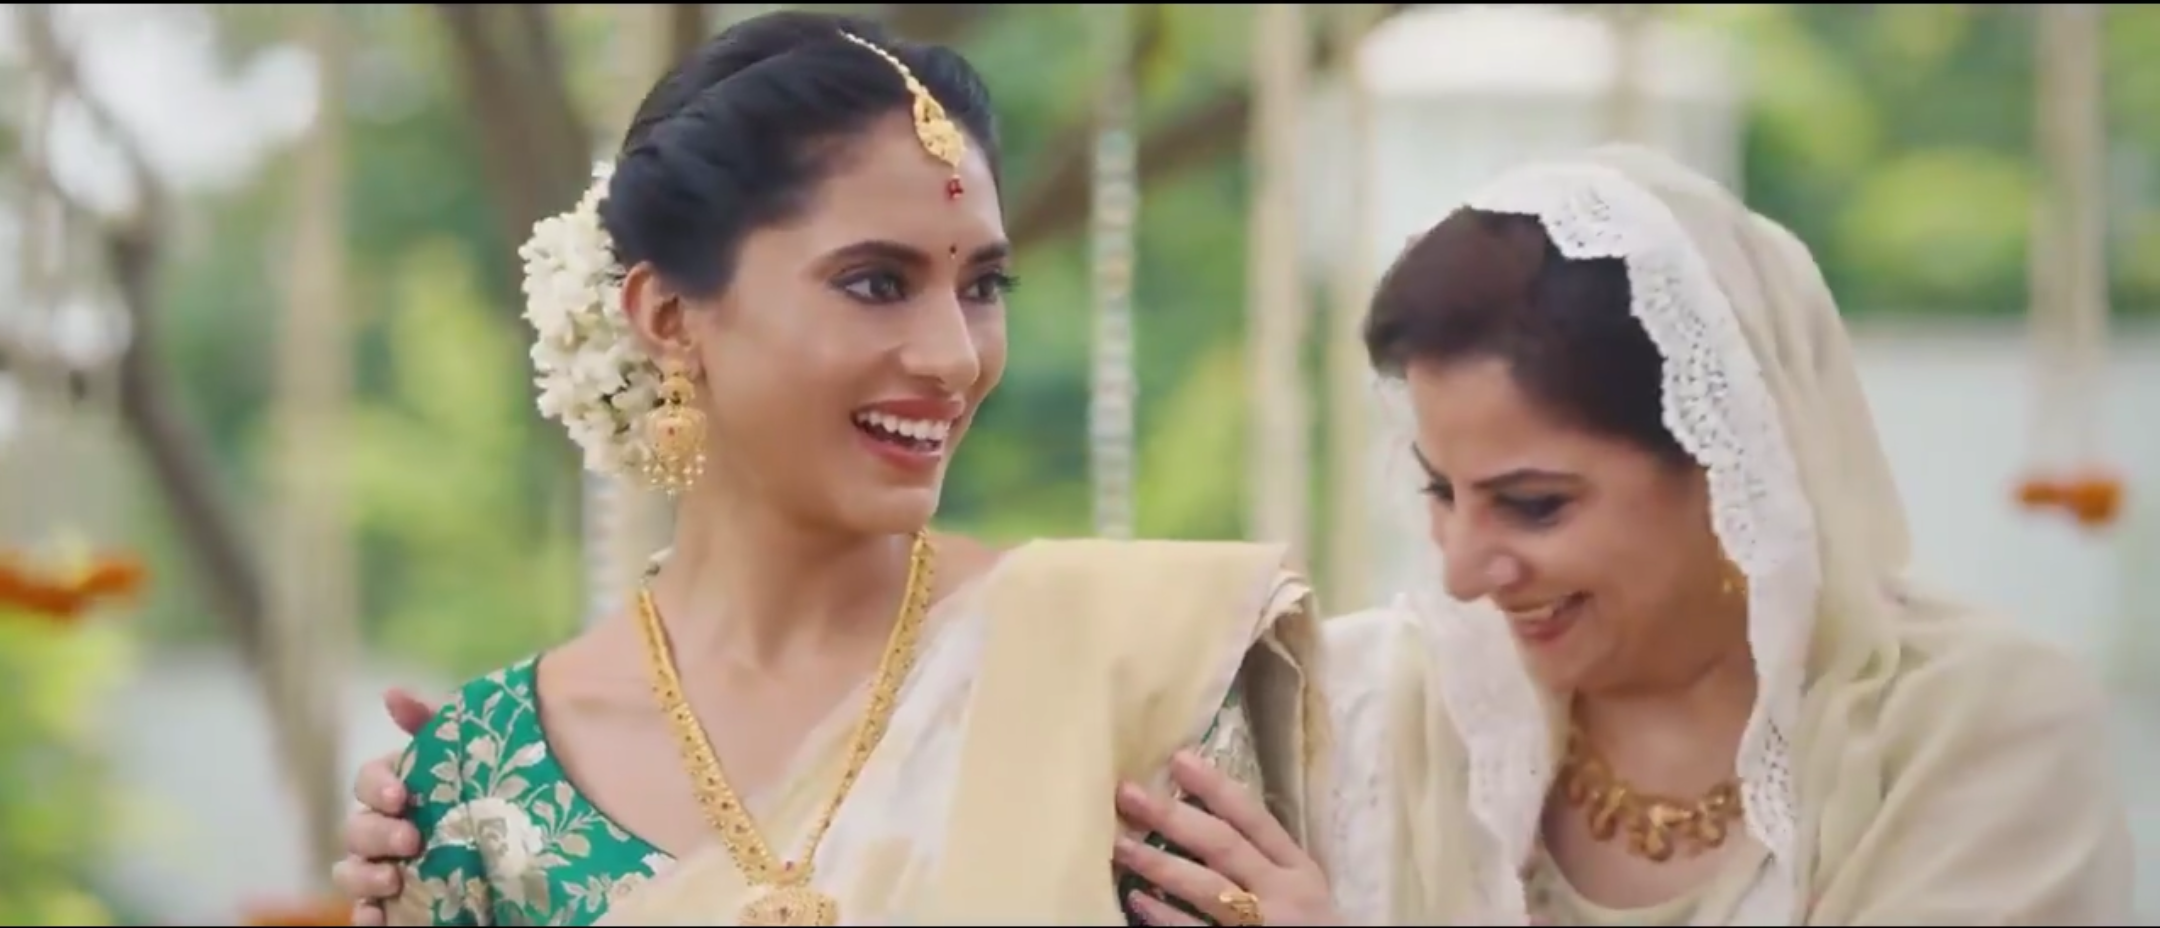 Brand Pulls Ad Featuring Muslim Man And Hindu Wife After Complaints Of